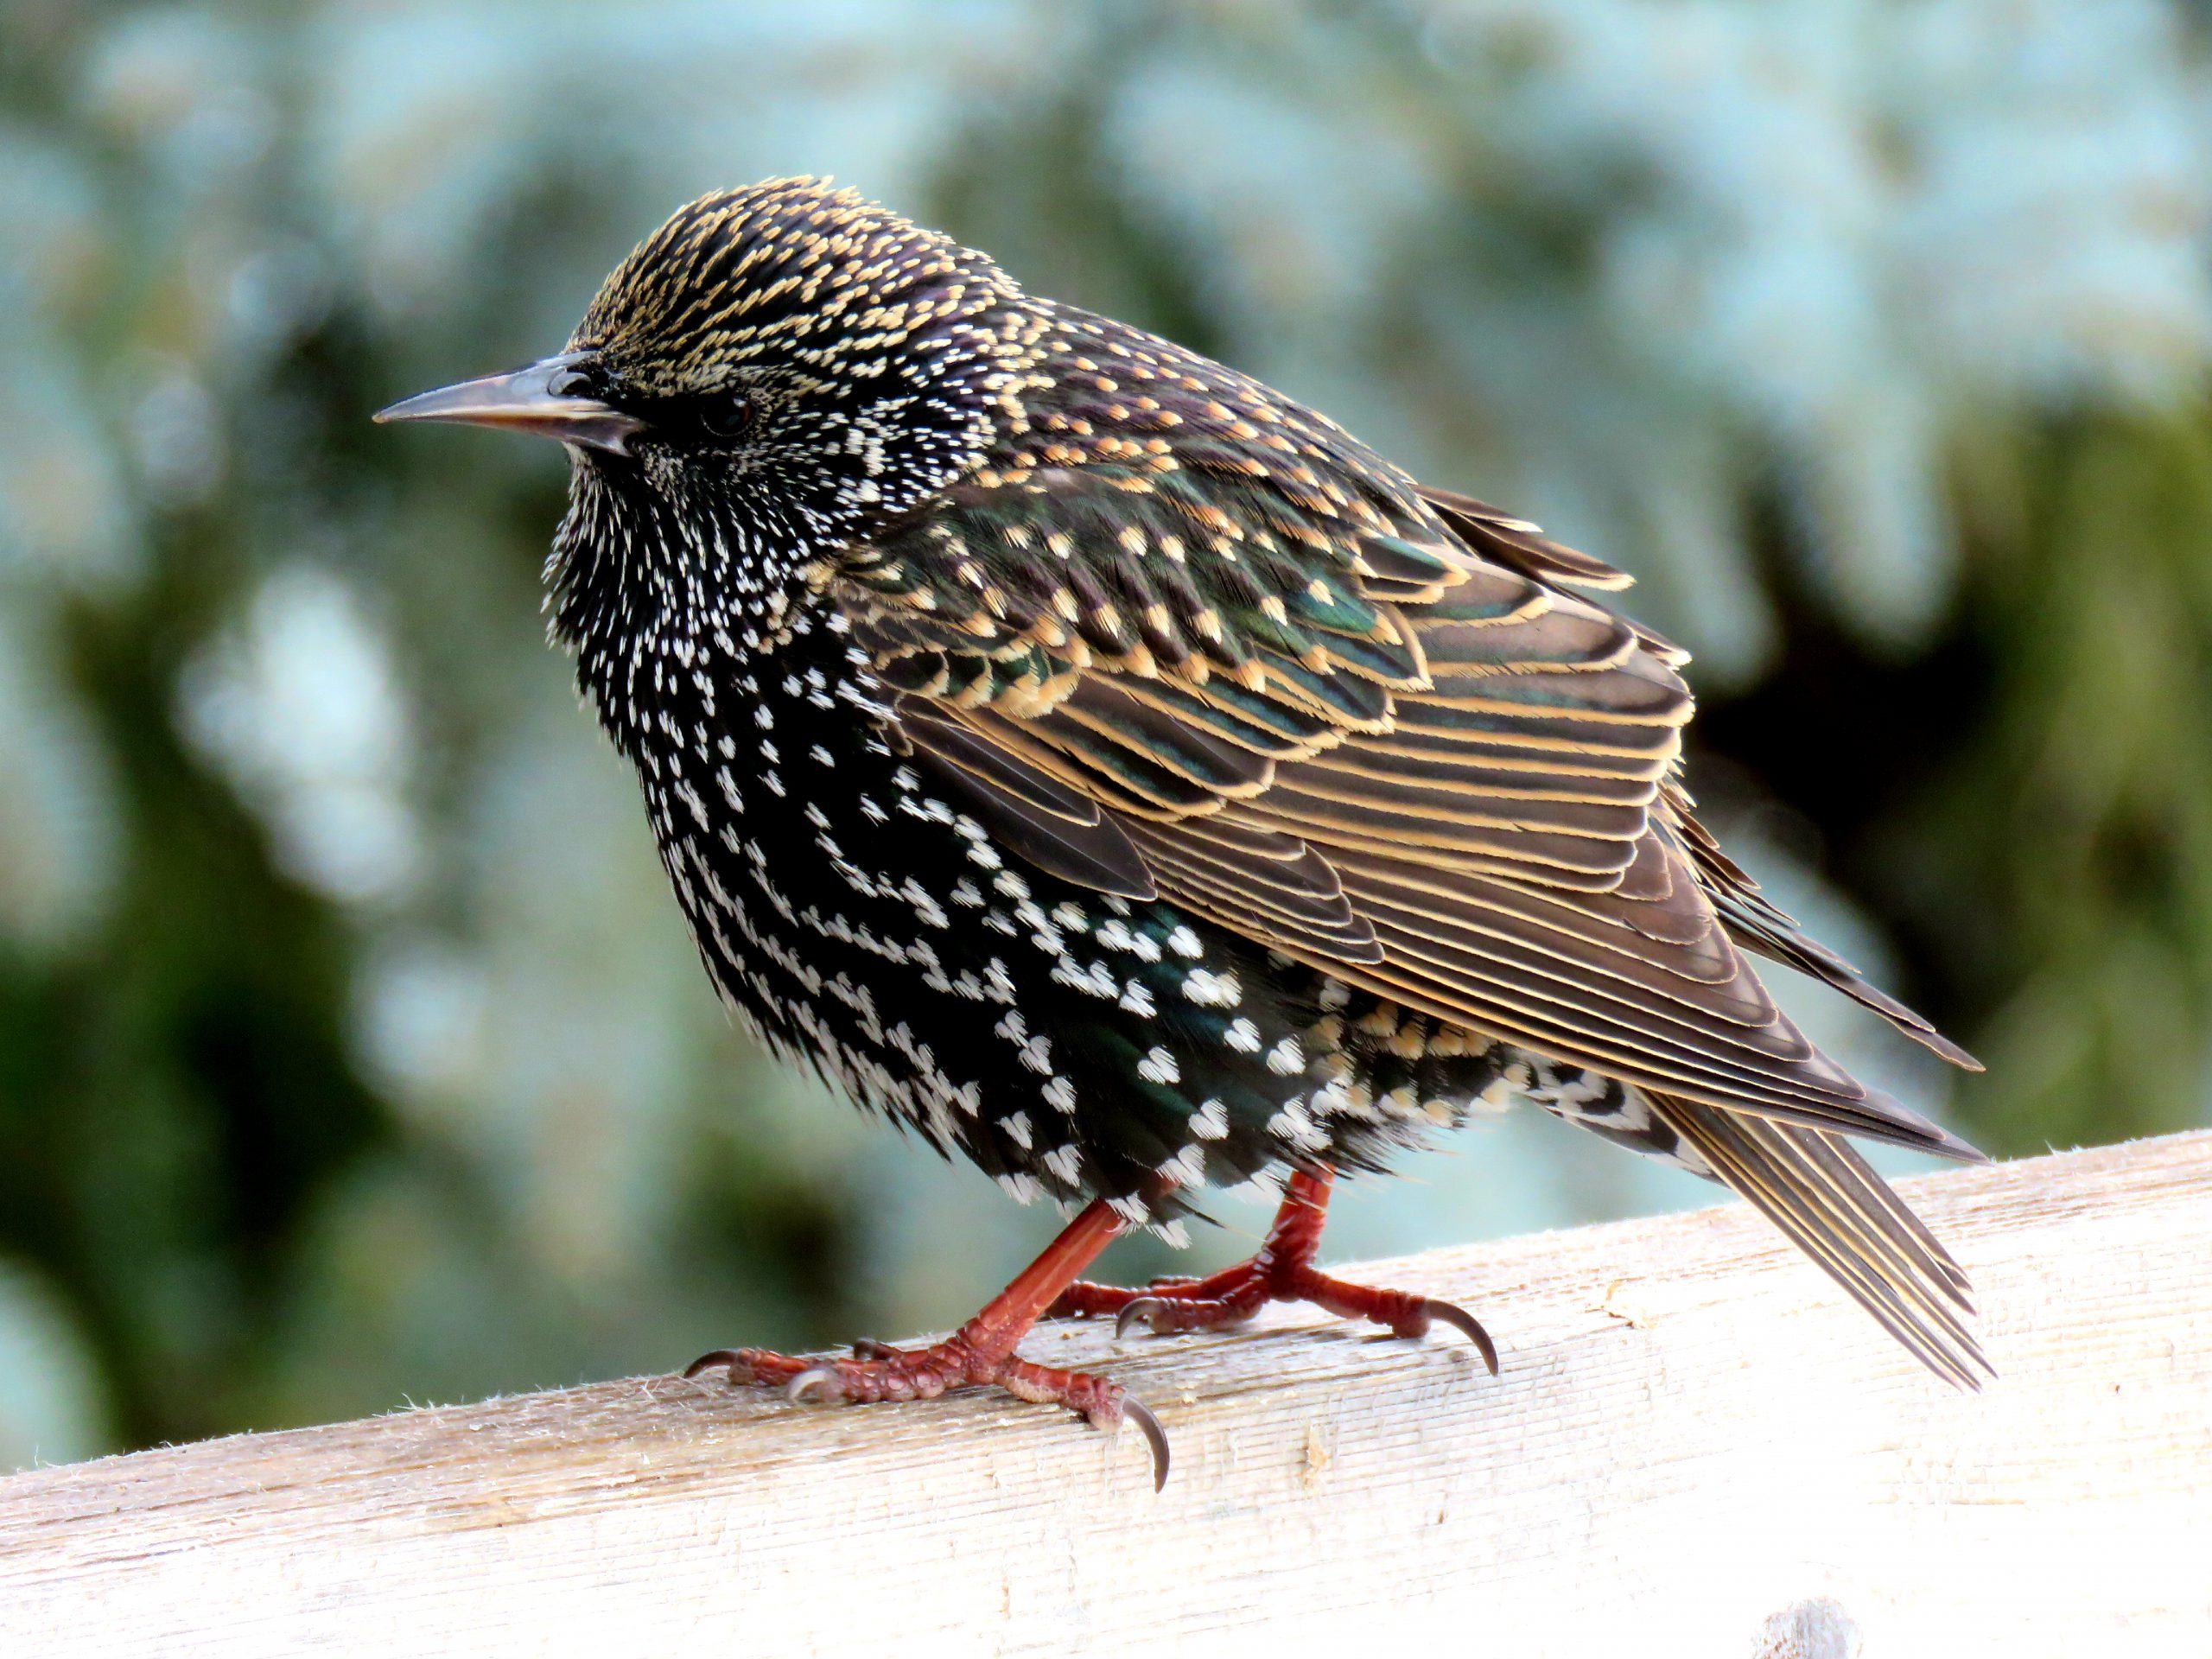 A European Starling on a fence